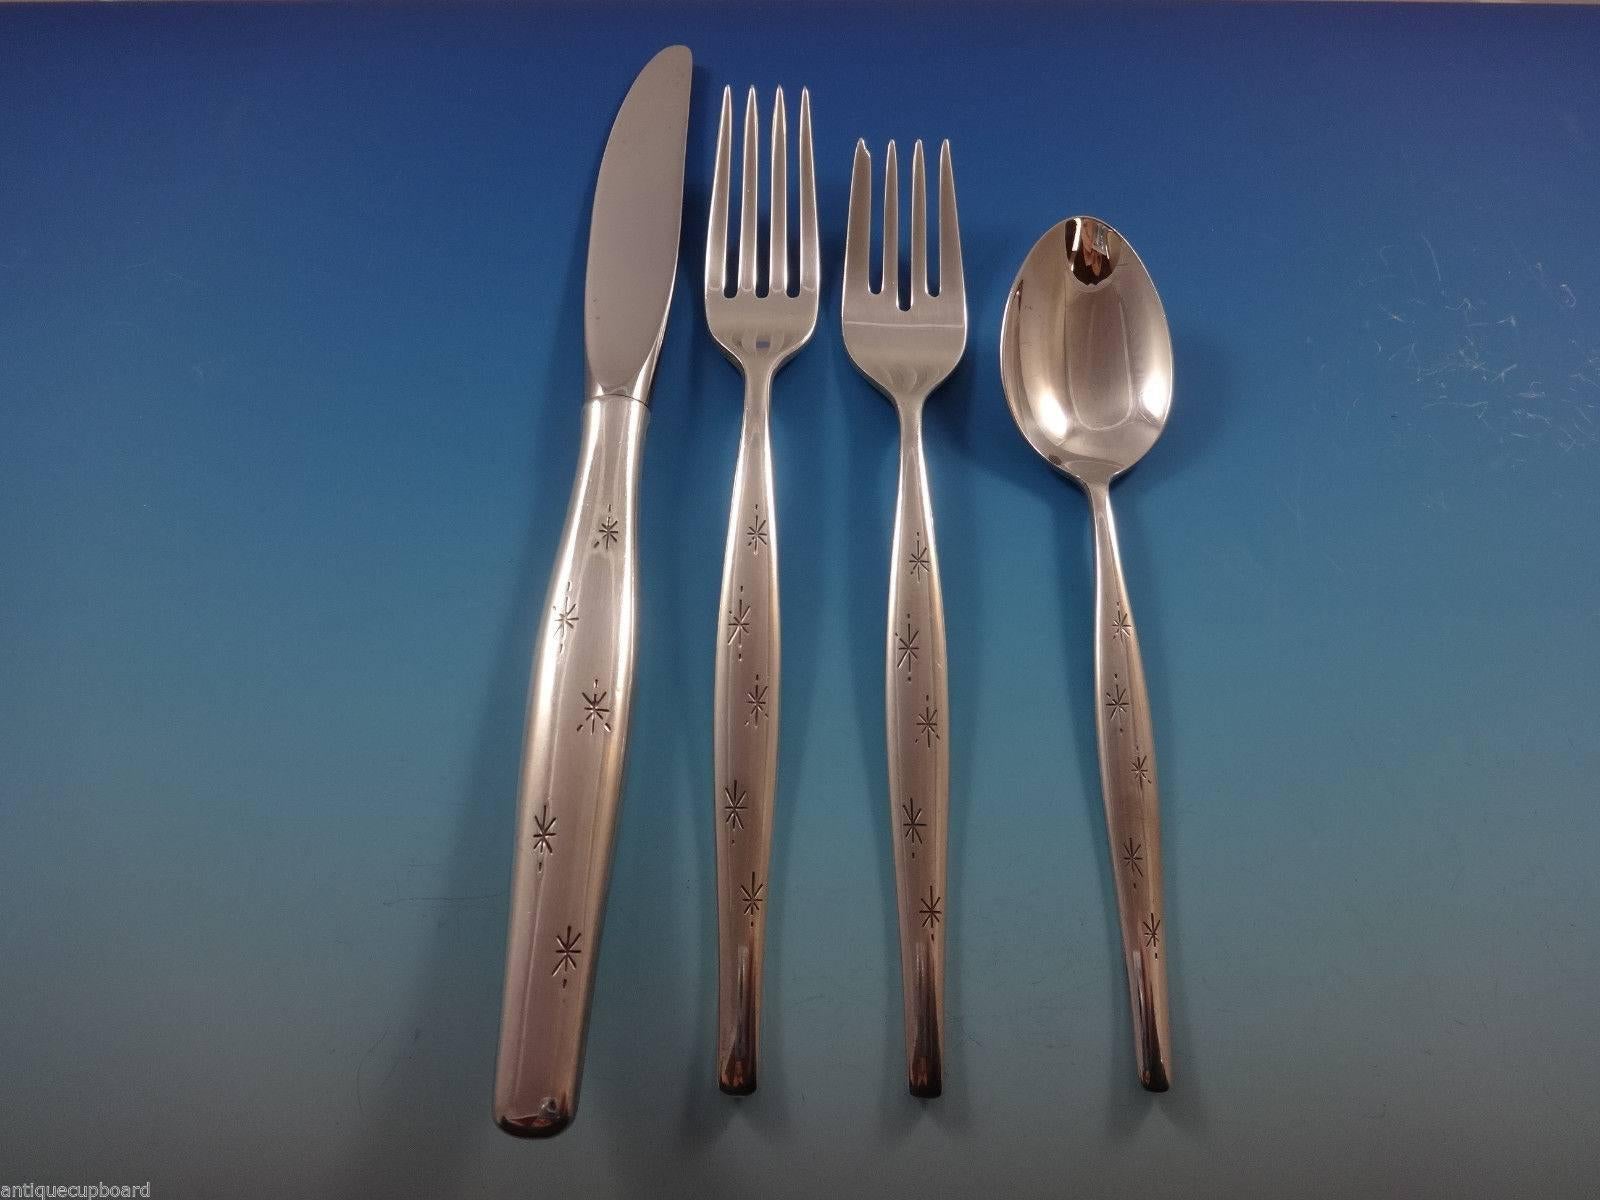 Mid-Century Modern Stardust by Gorham, circa 1956 sterling silver flatware set - 28 pieces. Great starter set! This set includes:

Six knives, 9 3/8